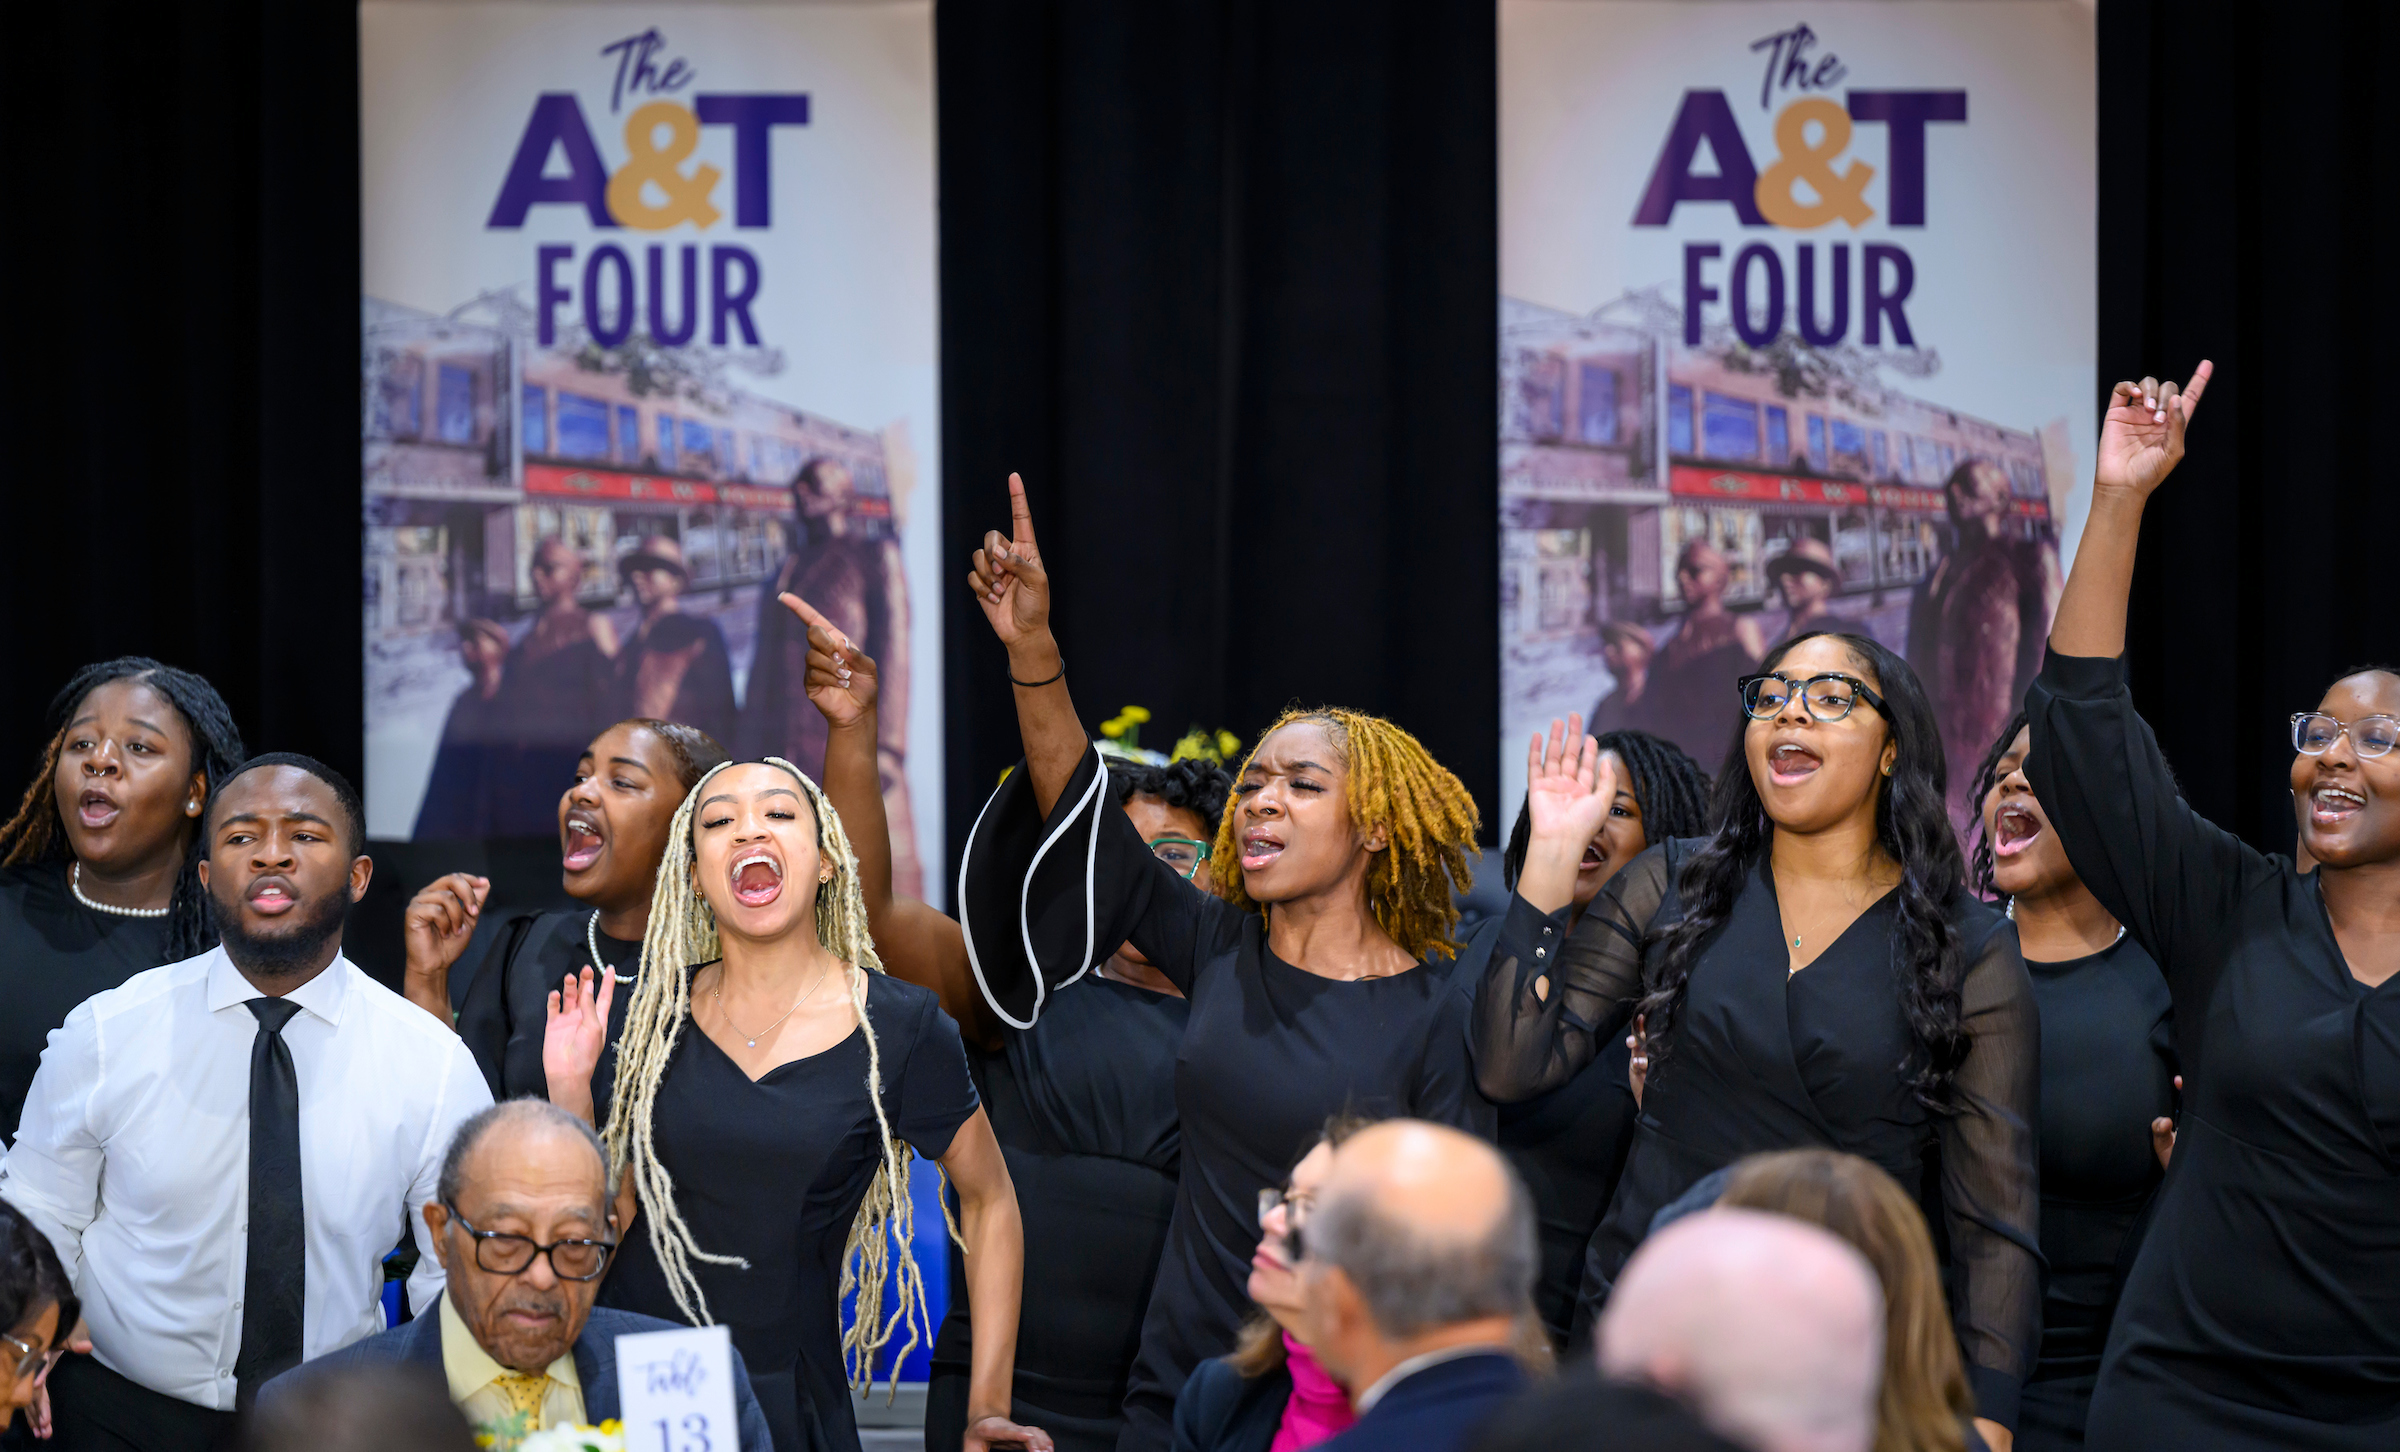 N.C. A&T Celebrates “Strength in Our Unity” on 64th Anniversary of SitIn